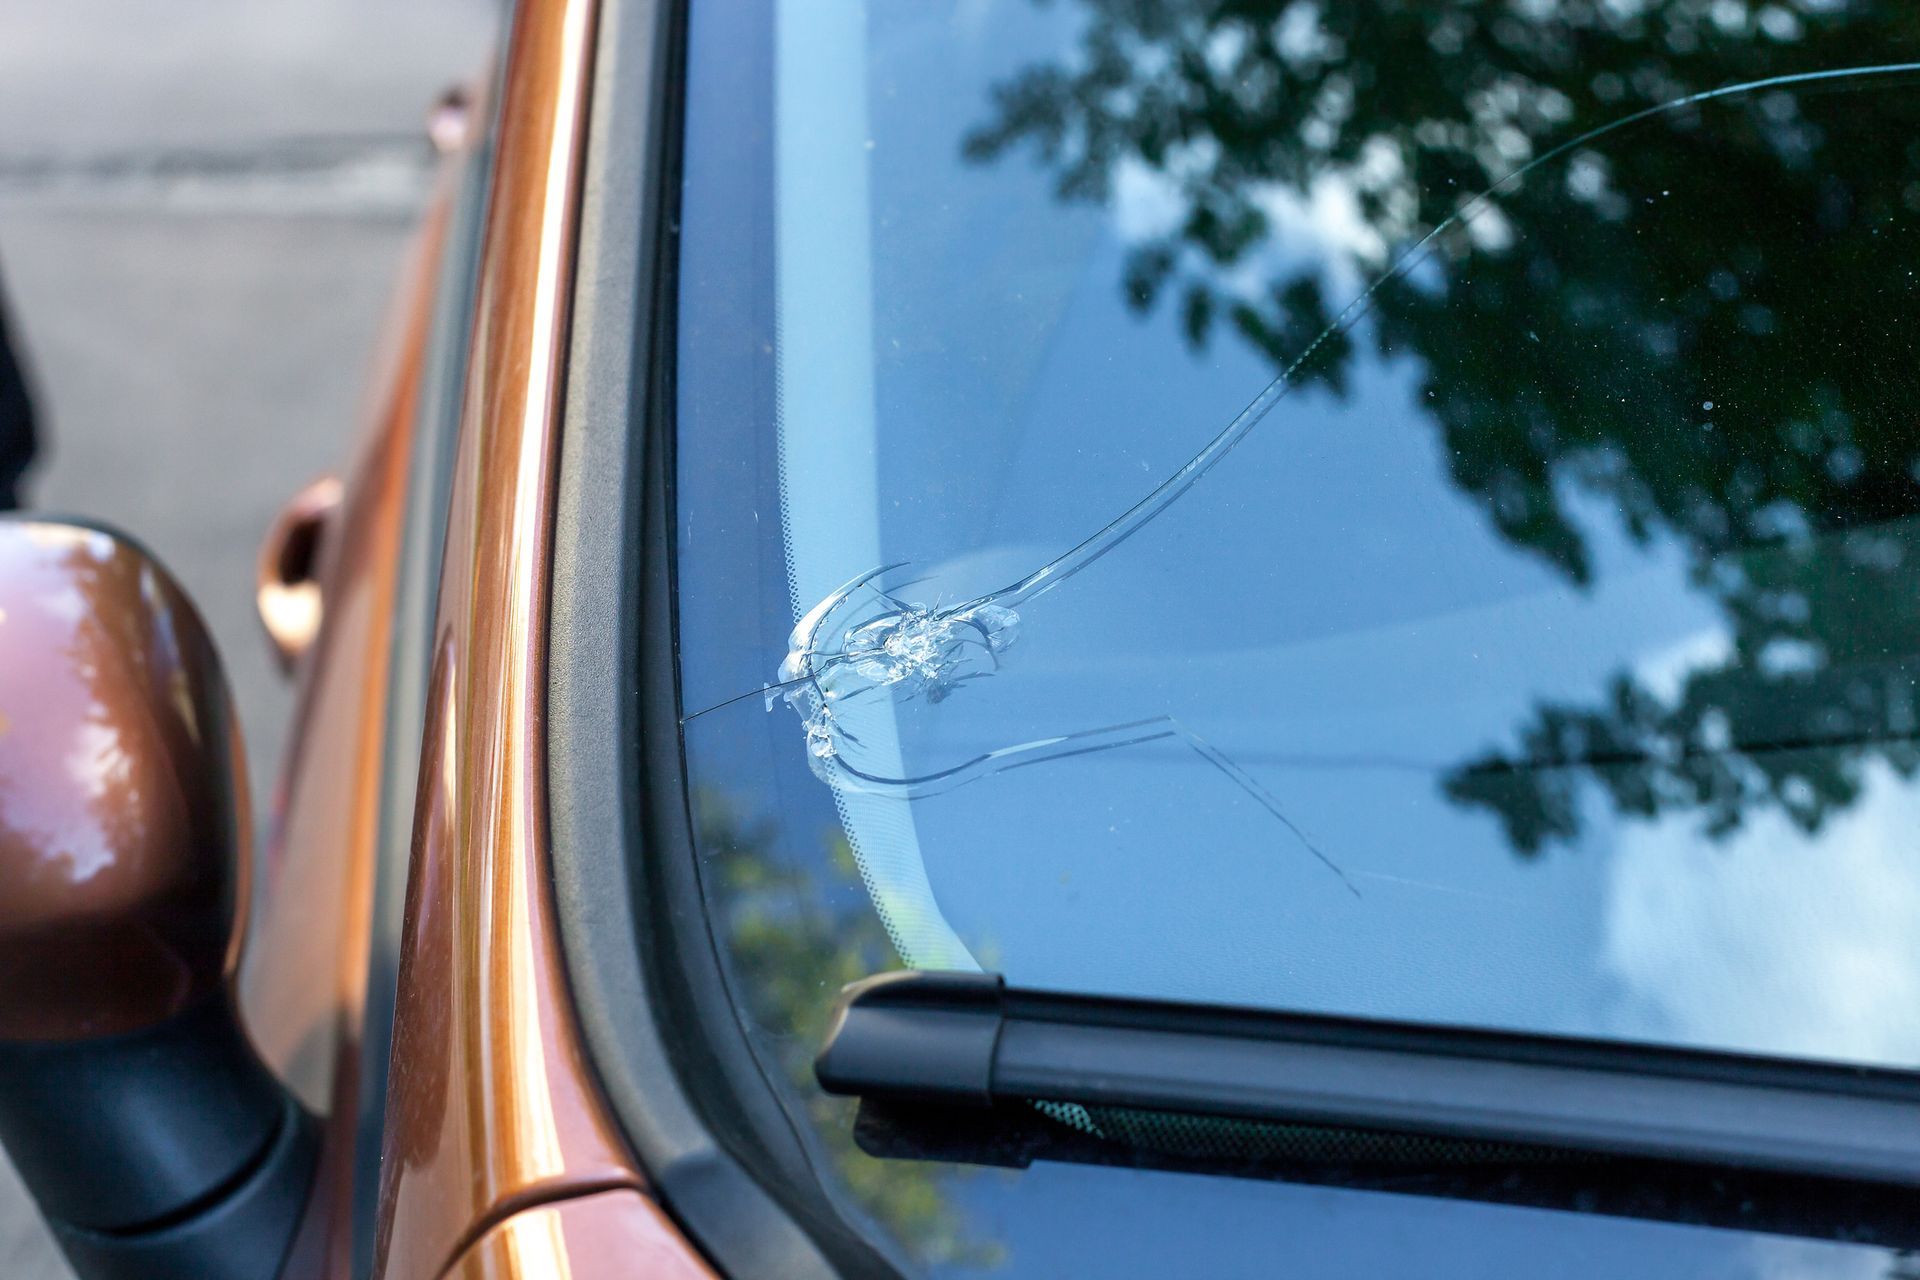 Cracked Car Window - St. Peters, MO - Martins Auto Body & Paint Supplies